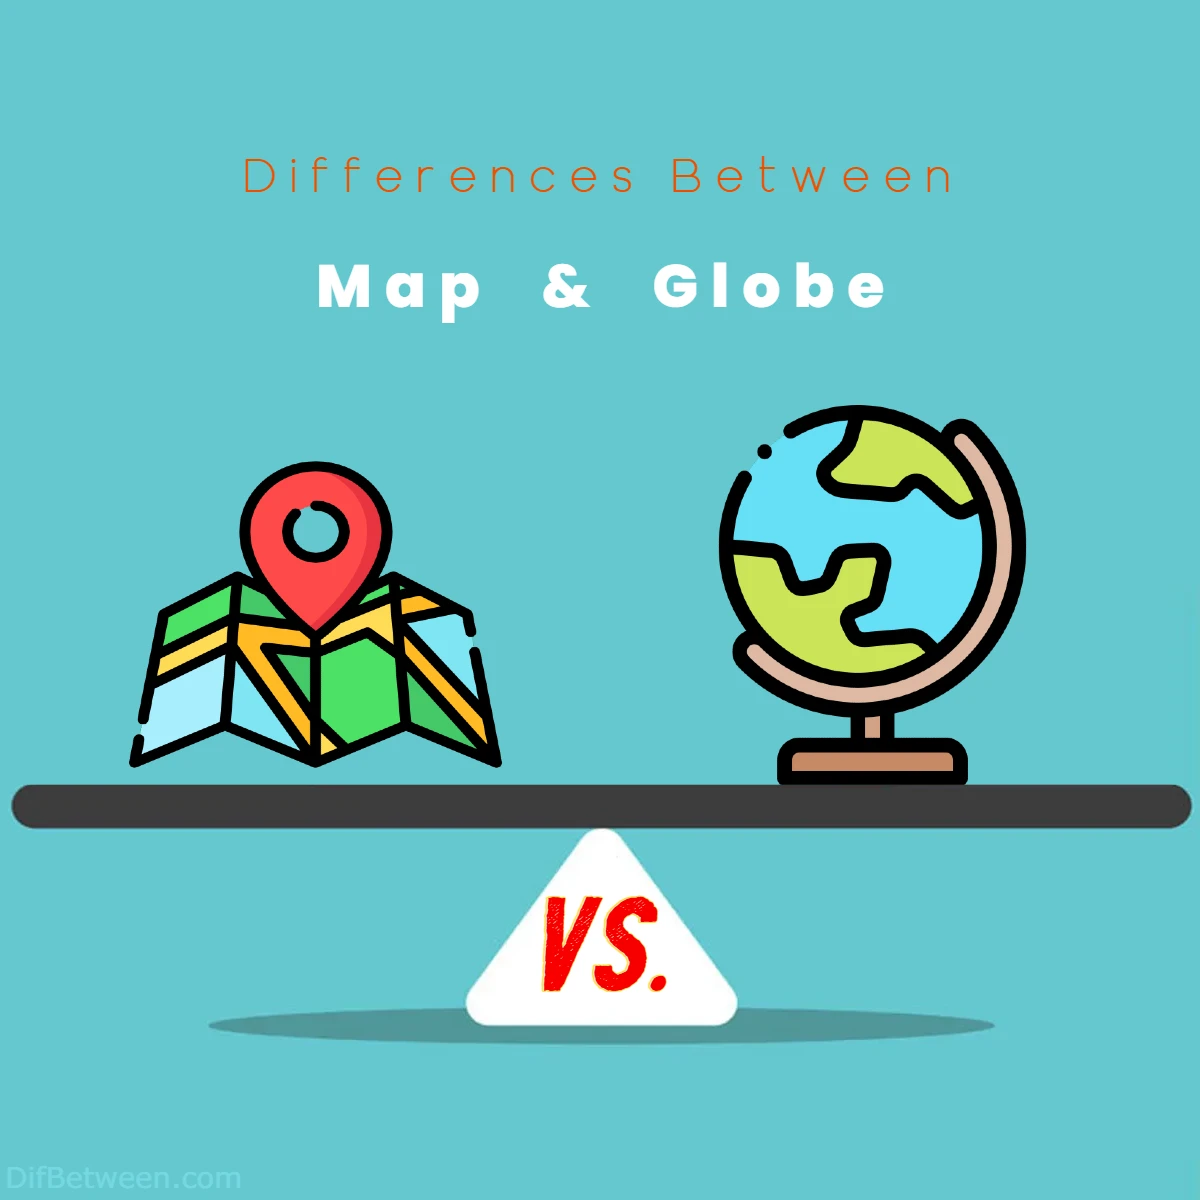 Differences Between Map vs Globe